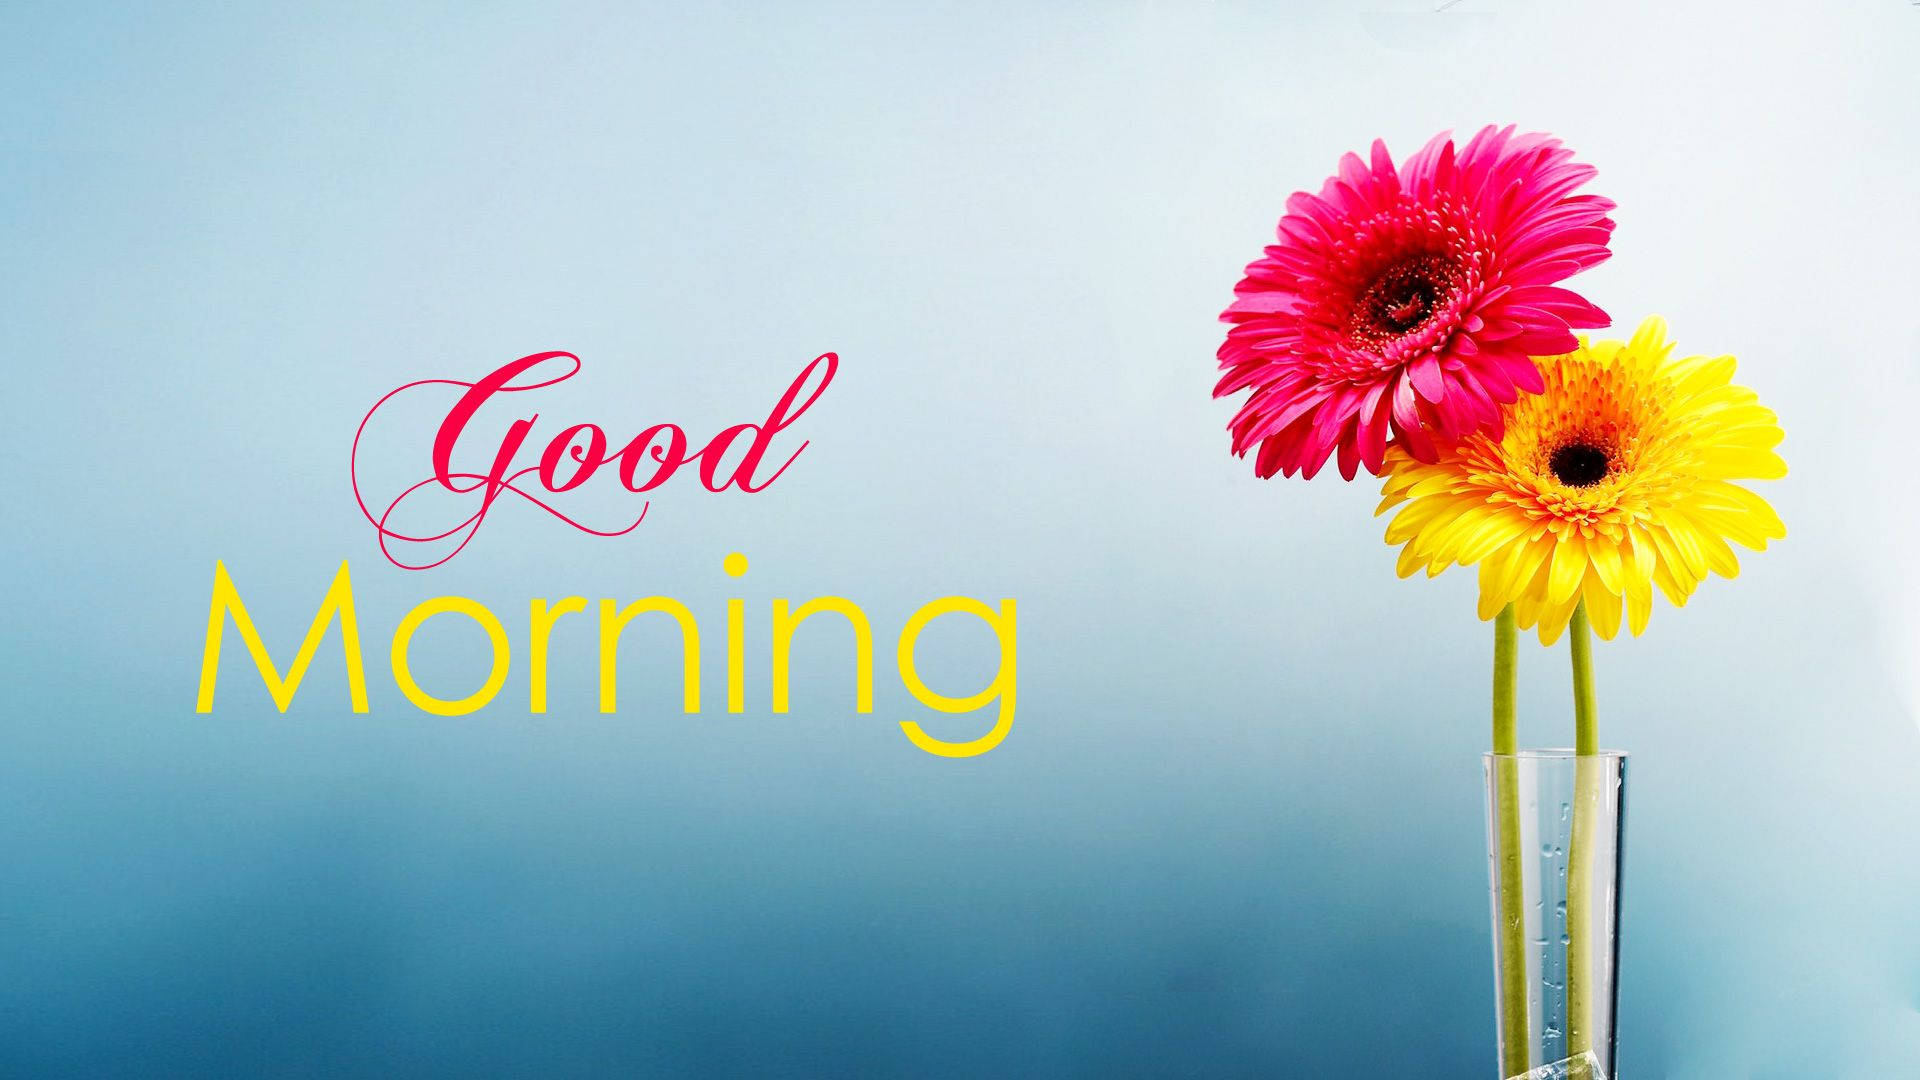 Good Morning Wallpaper With Flowers, Full Hd 1920x1080 Gm Image Picture